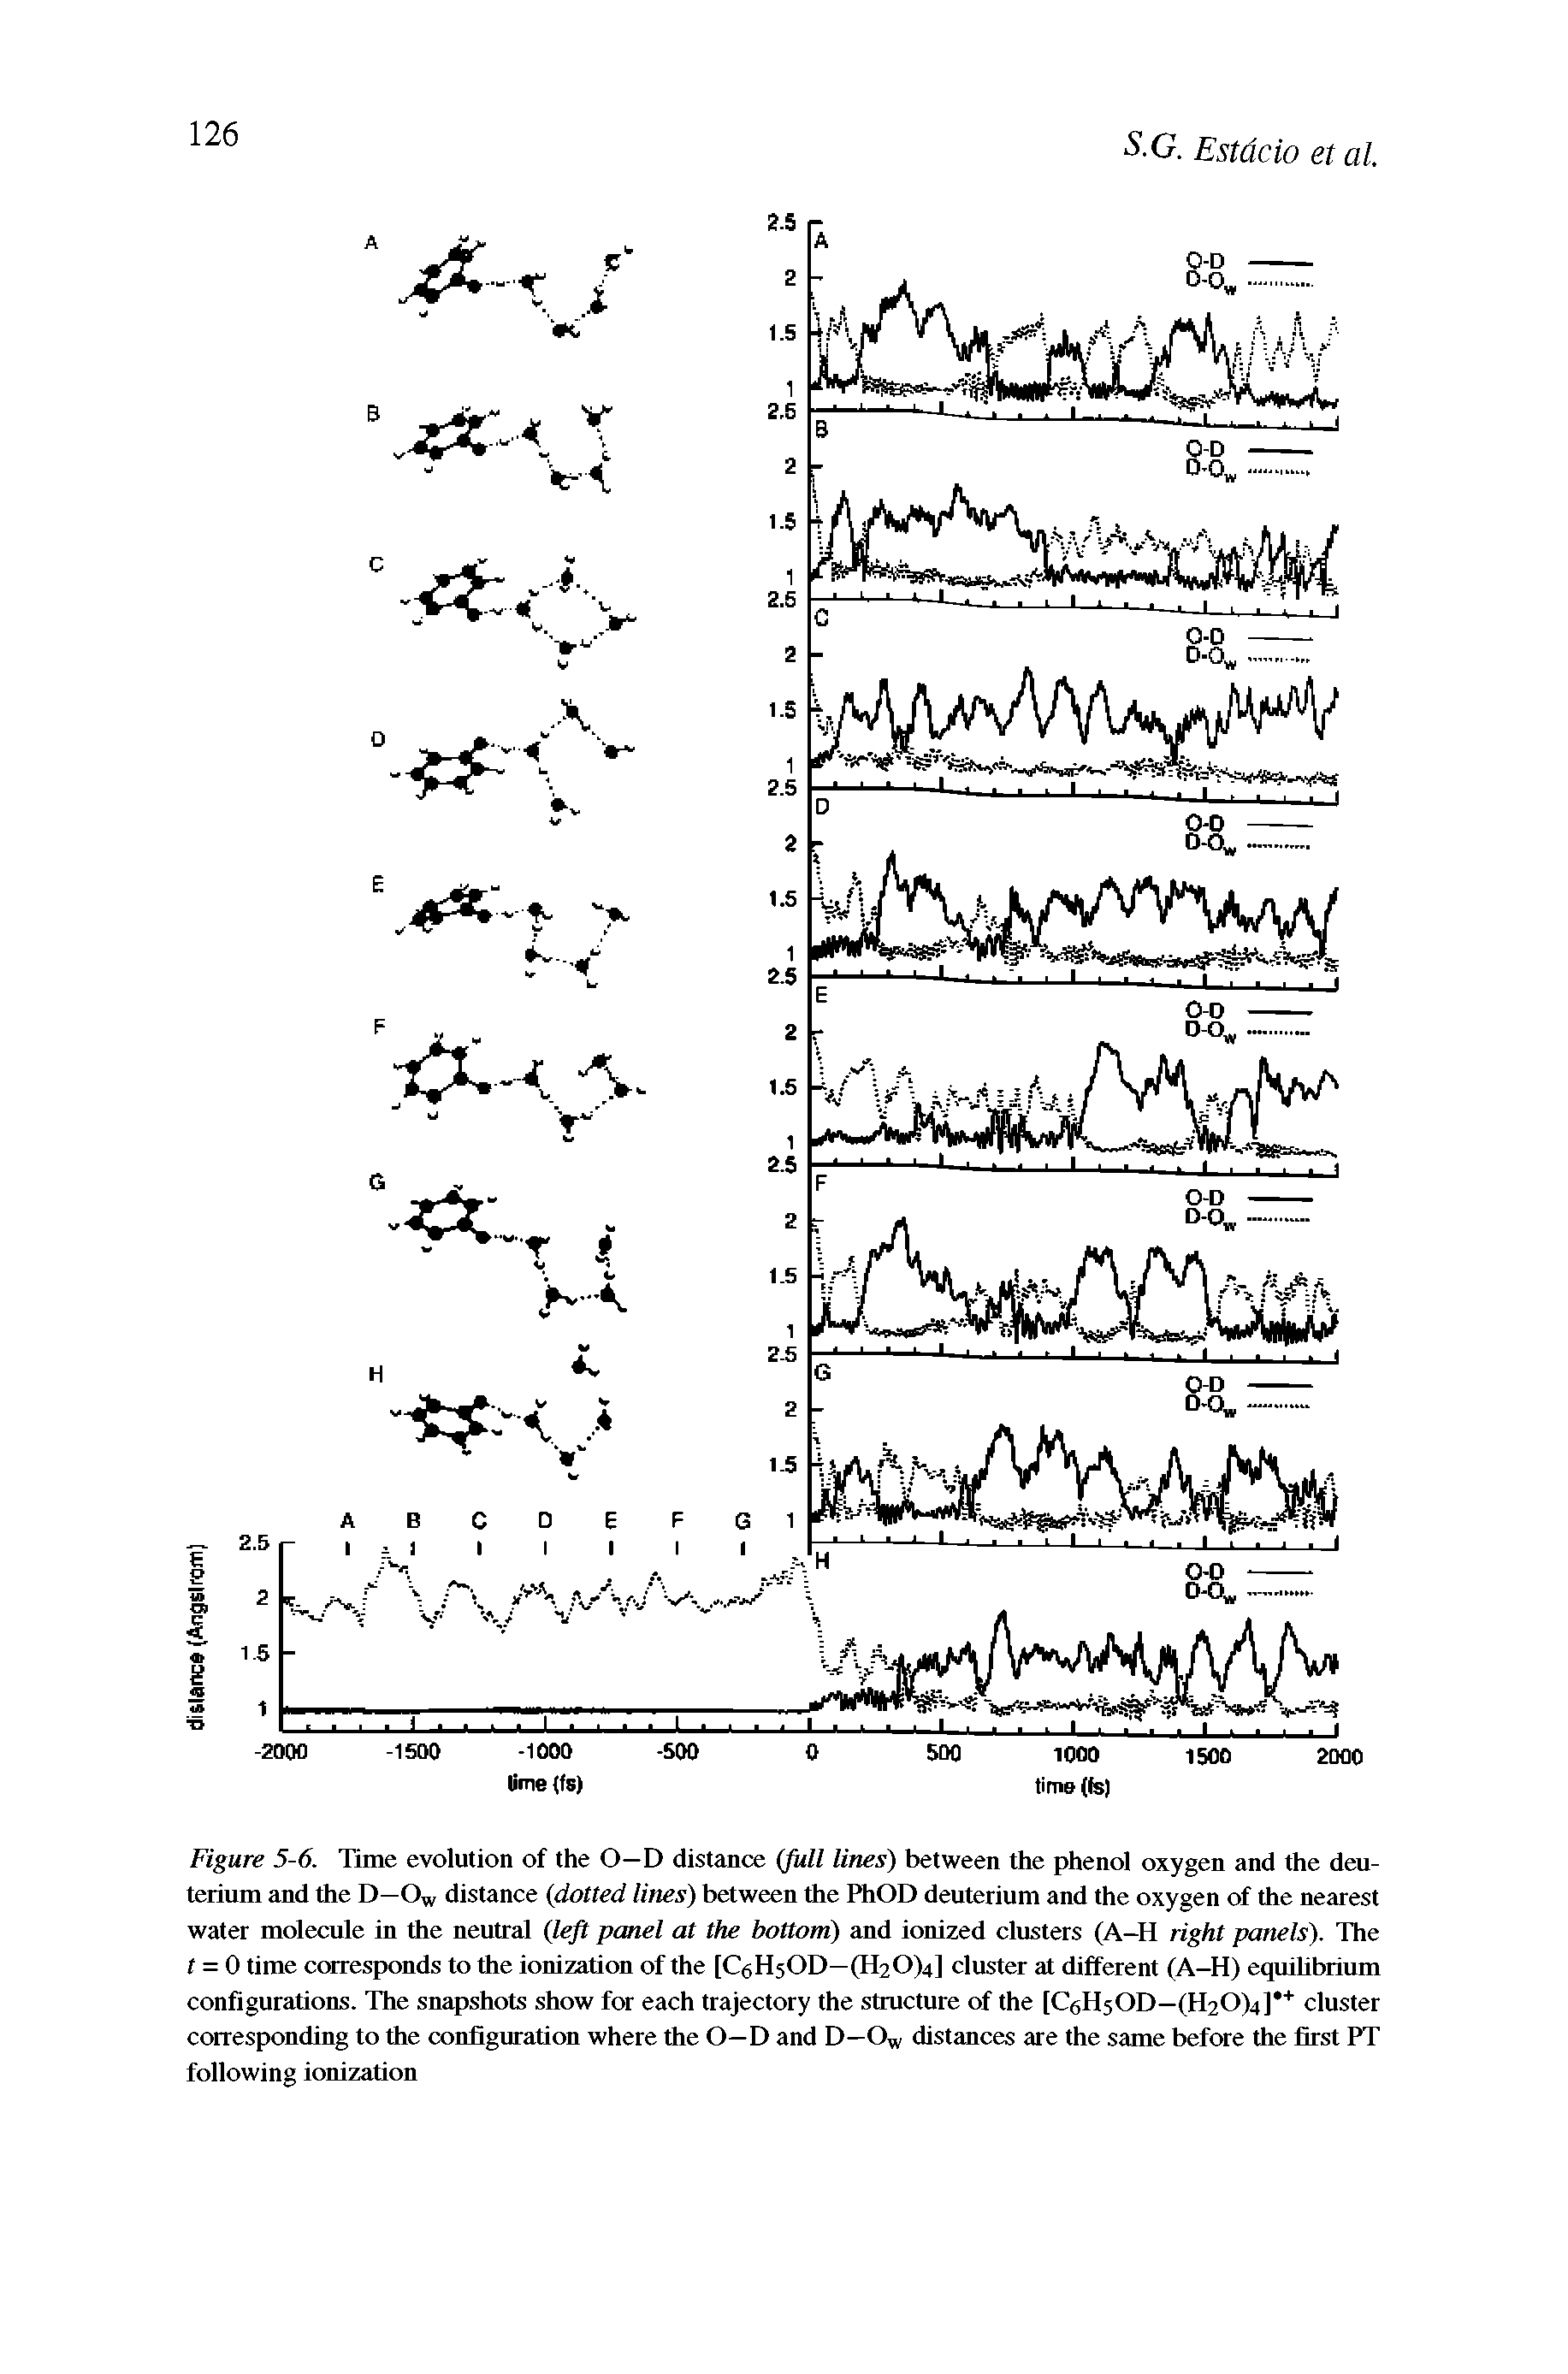 Figure 5-6. Time evolution of the O—D distance (full lines) between the phenol oxygen and the deuterium and the D—Ow distance (dotted lines) between the PhOD deuterium and the oxygen of the nearest water molecule in the neutral (left panel at the bottom) and ionized clusters (A-H right panels). The t = 0 time corresponds to the ionization of the [C5H5OD—(IhOb cluster at different (A-H) equilibrium configurations. The snapshots show for each trajectory the structure of the [C HsOD—(fyO) ] cluster corresponding to the configuration where the O—D and D—Ow distances are the same before the first PT following ionization...